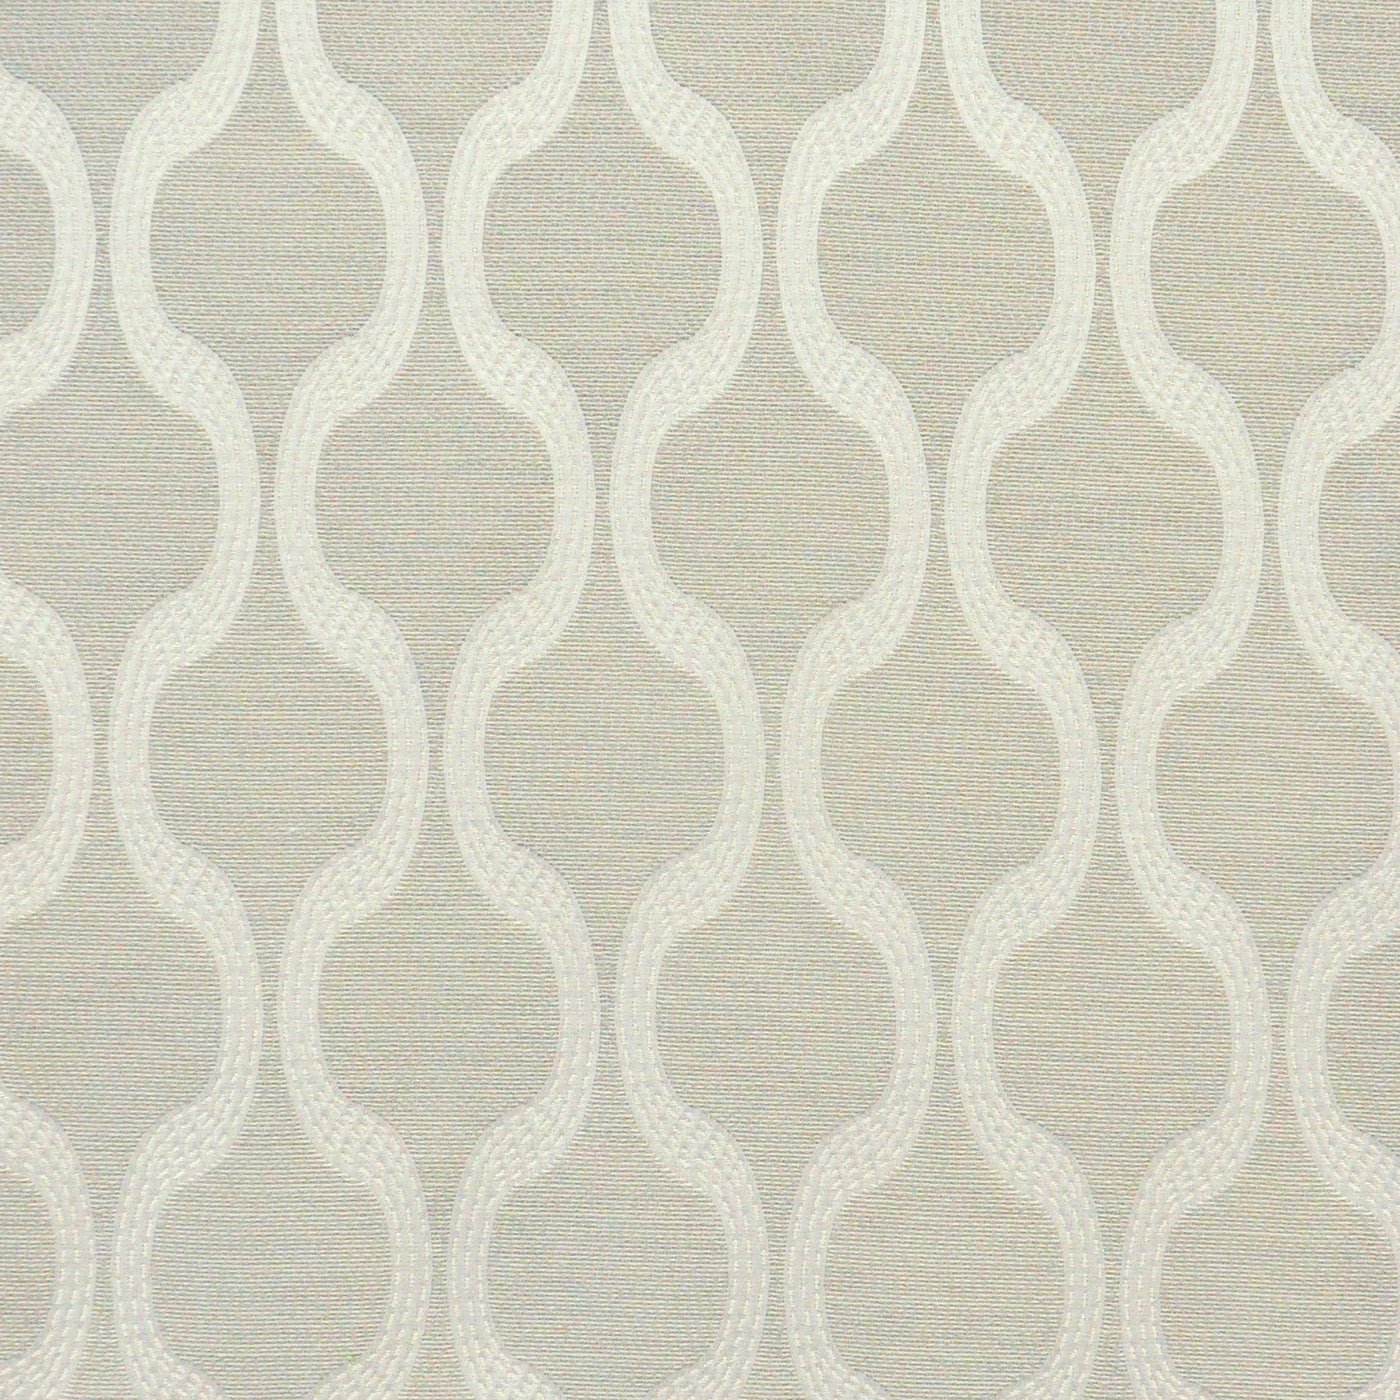 Purchase Maxwell Fabric - Cyrus, # 212 Oyster